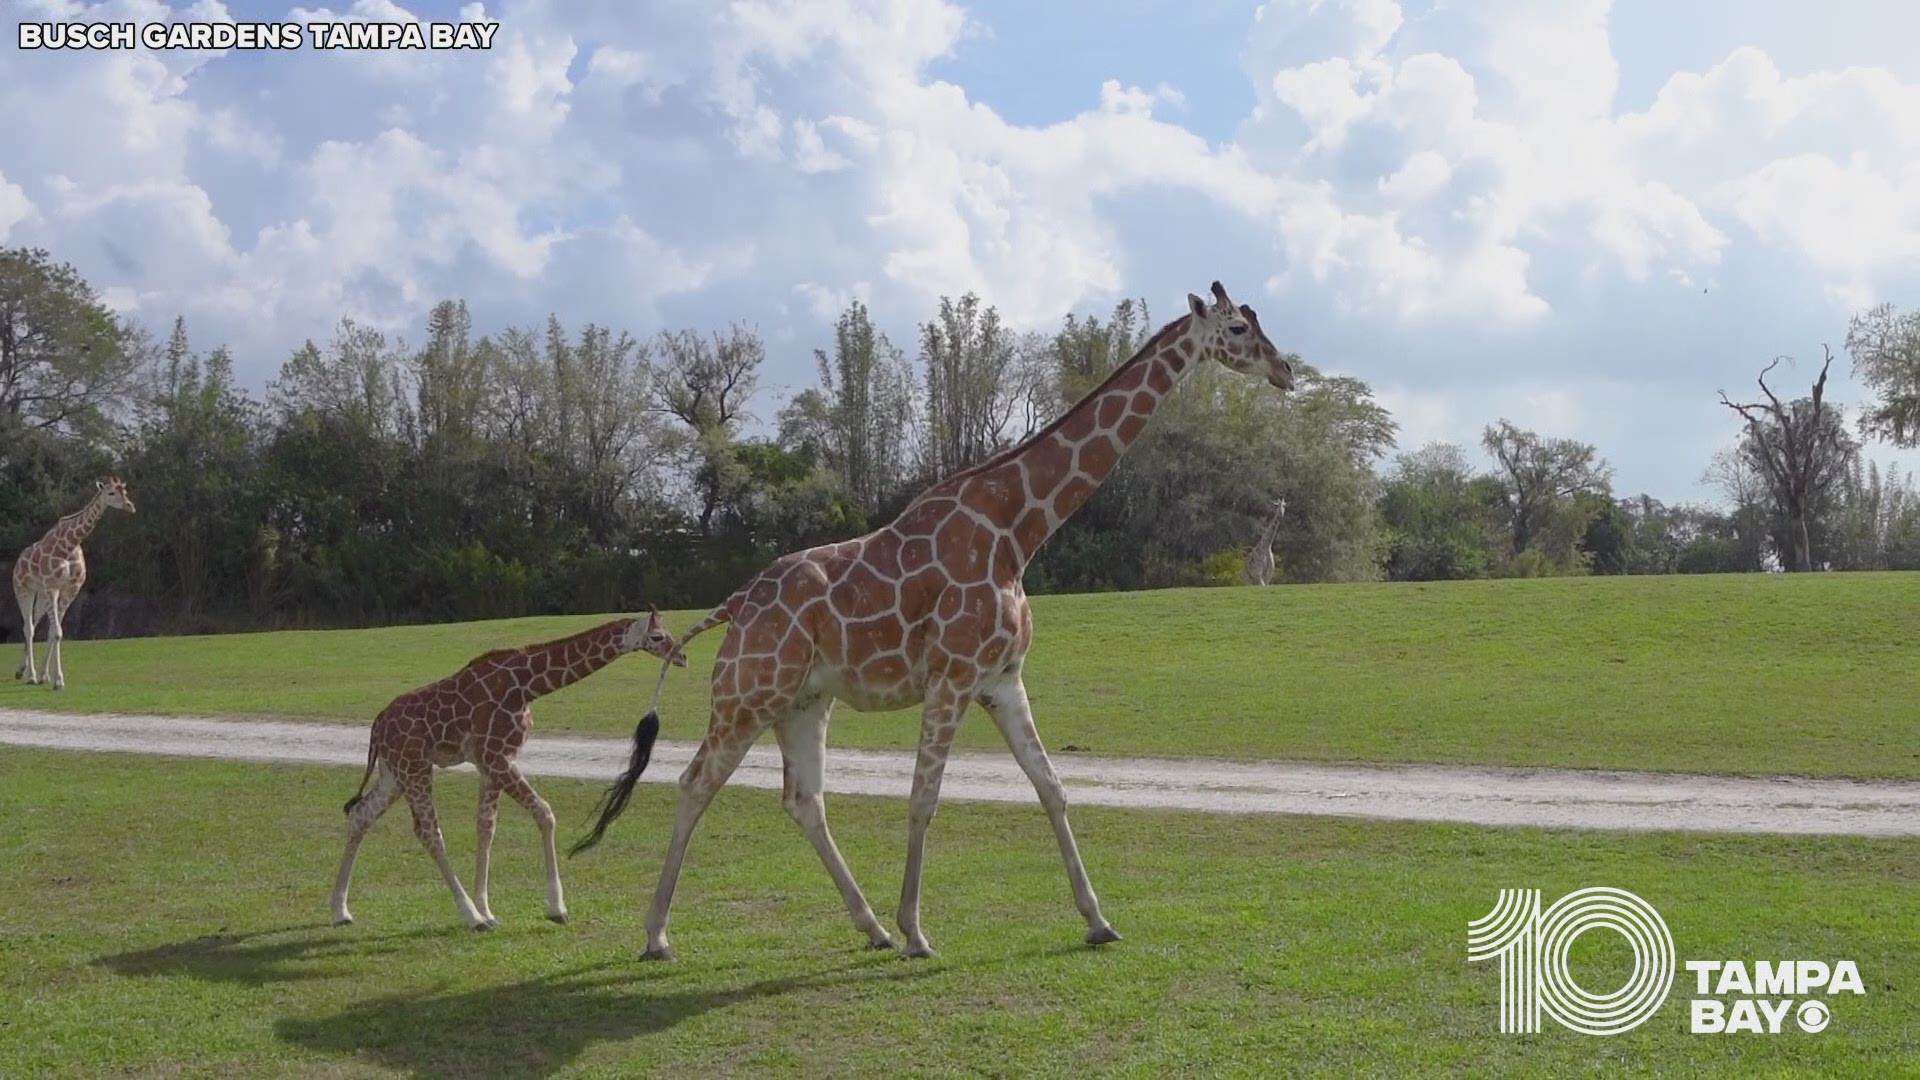 Cedora, a 2-month-old female giraffe, has made her debut at Busch Gardens Tampa Bay.